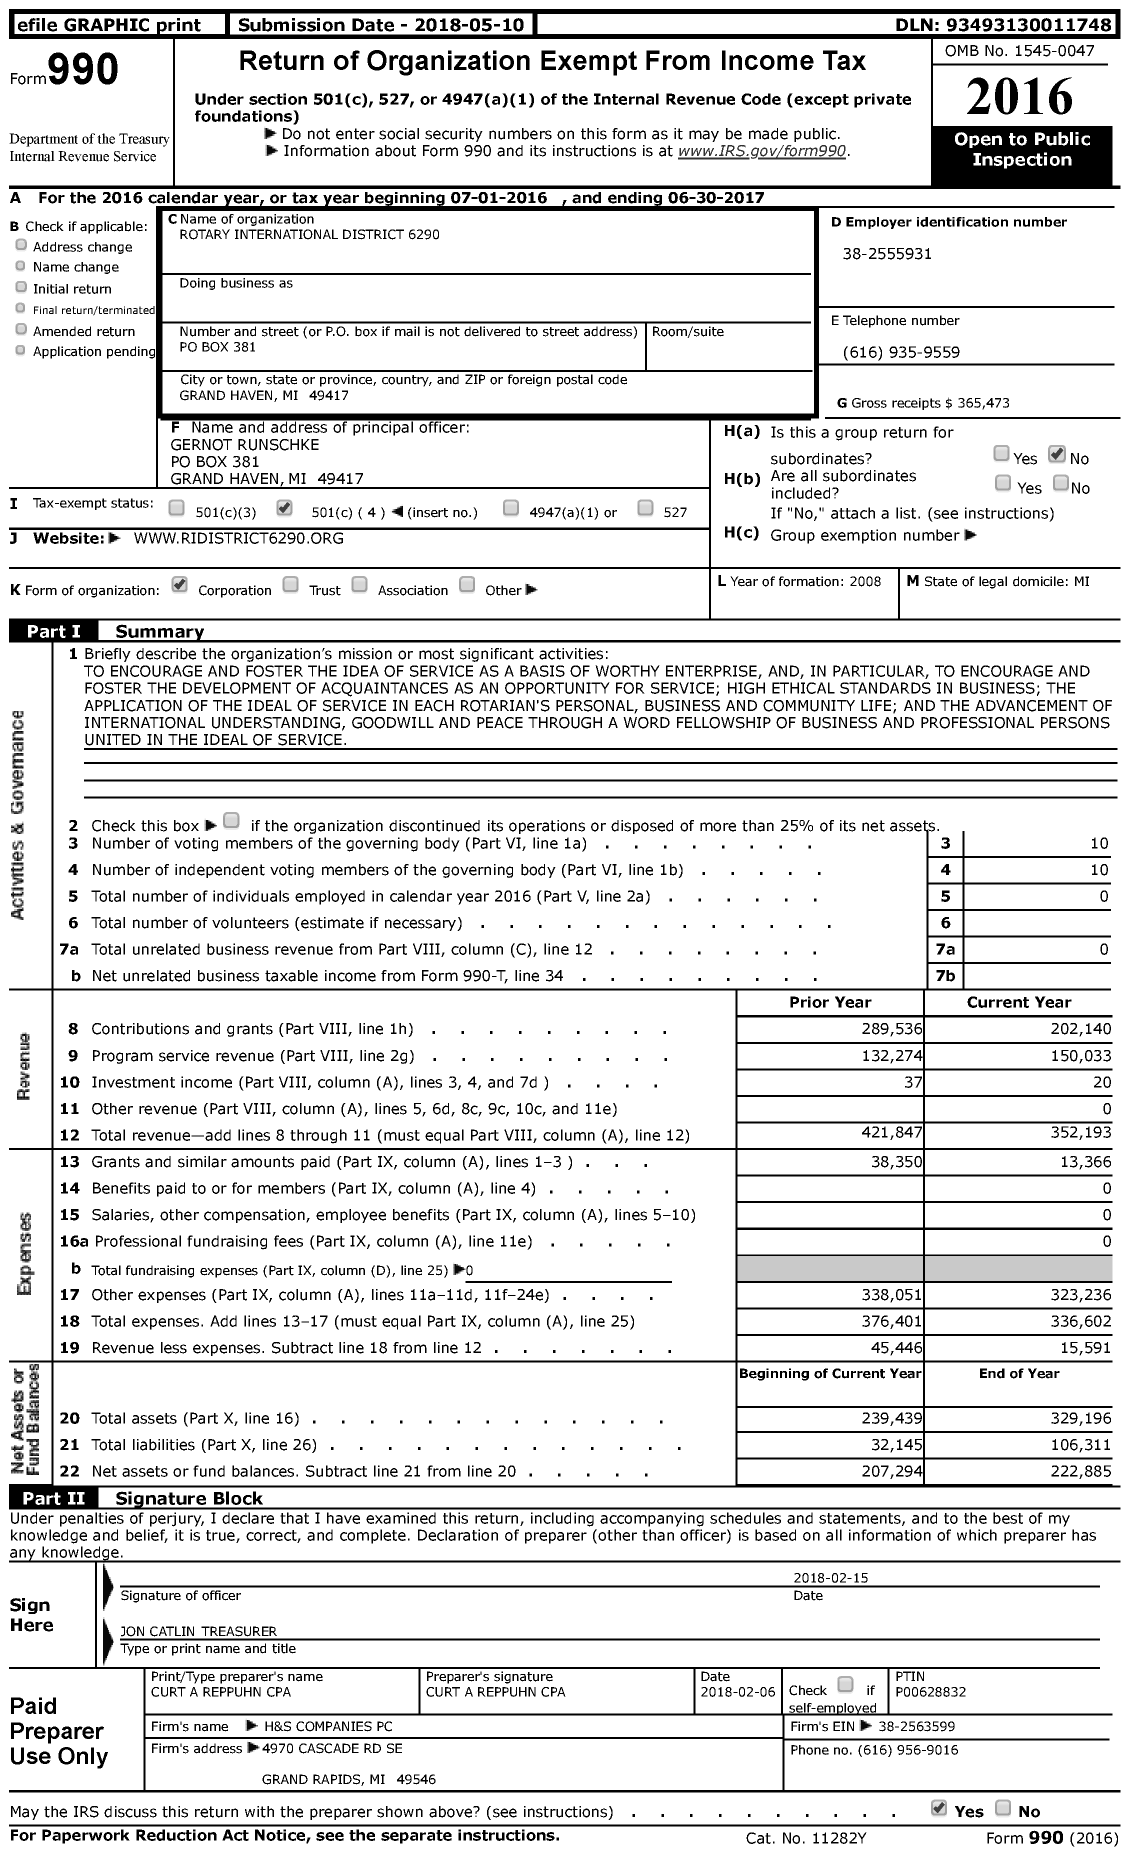 Image of first page of 2016 Form 990 for Rotary International District 6290